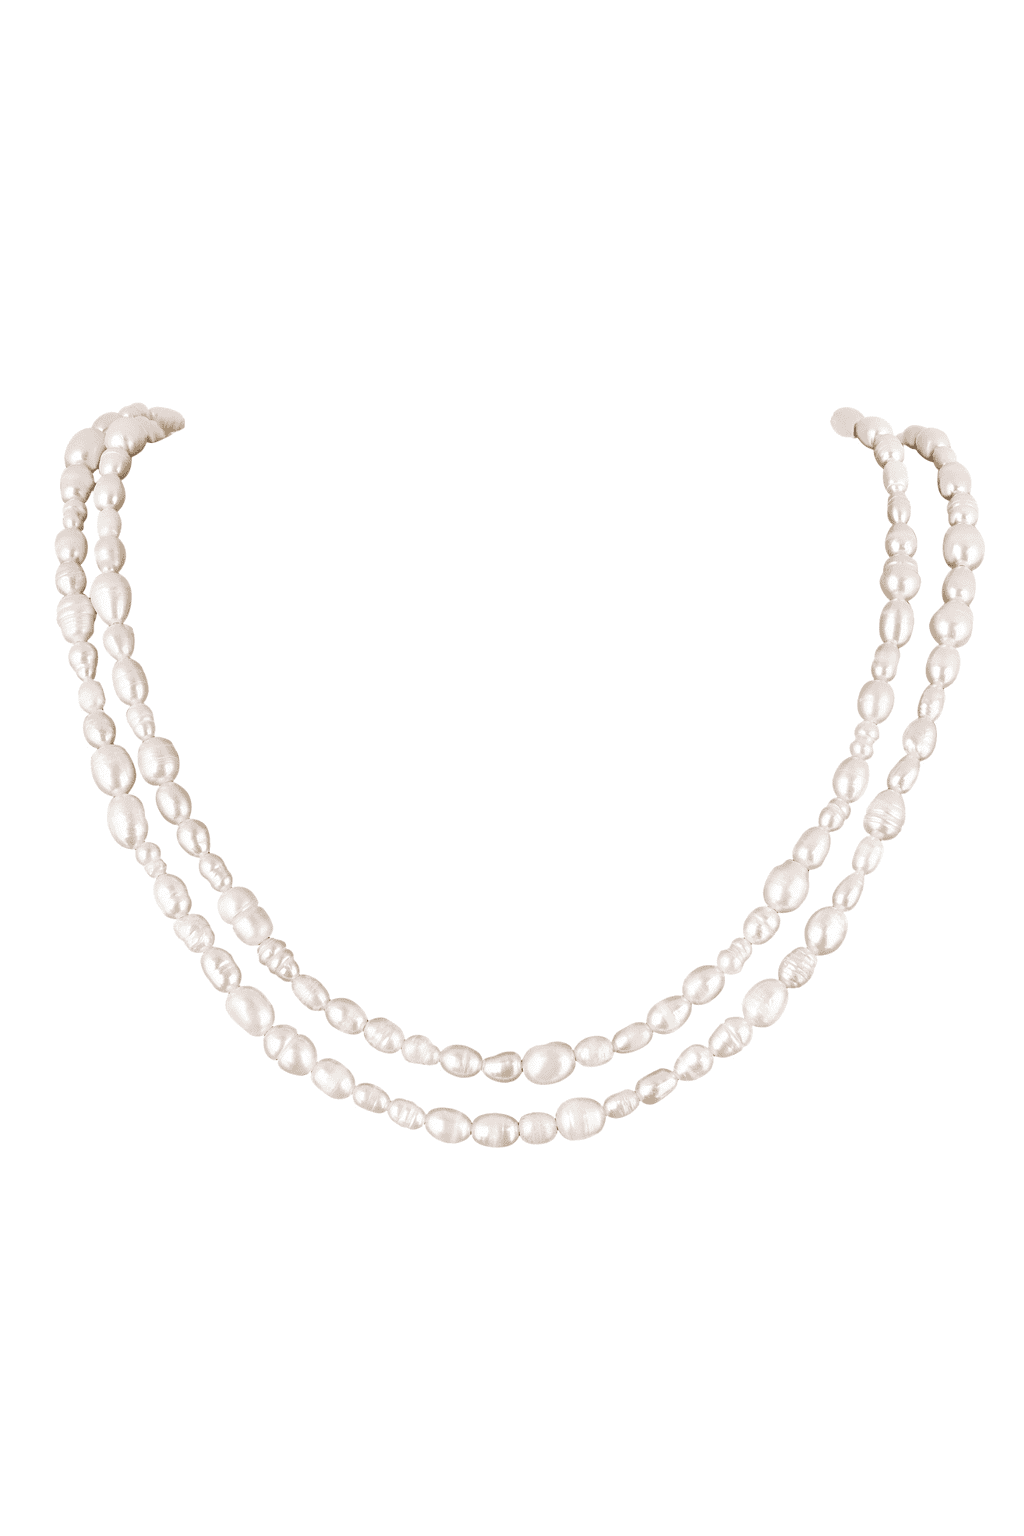 3 IN 1 NECKLACE – PEARLS